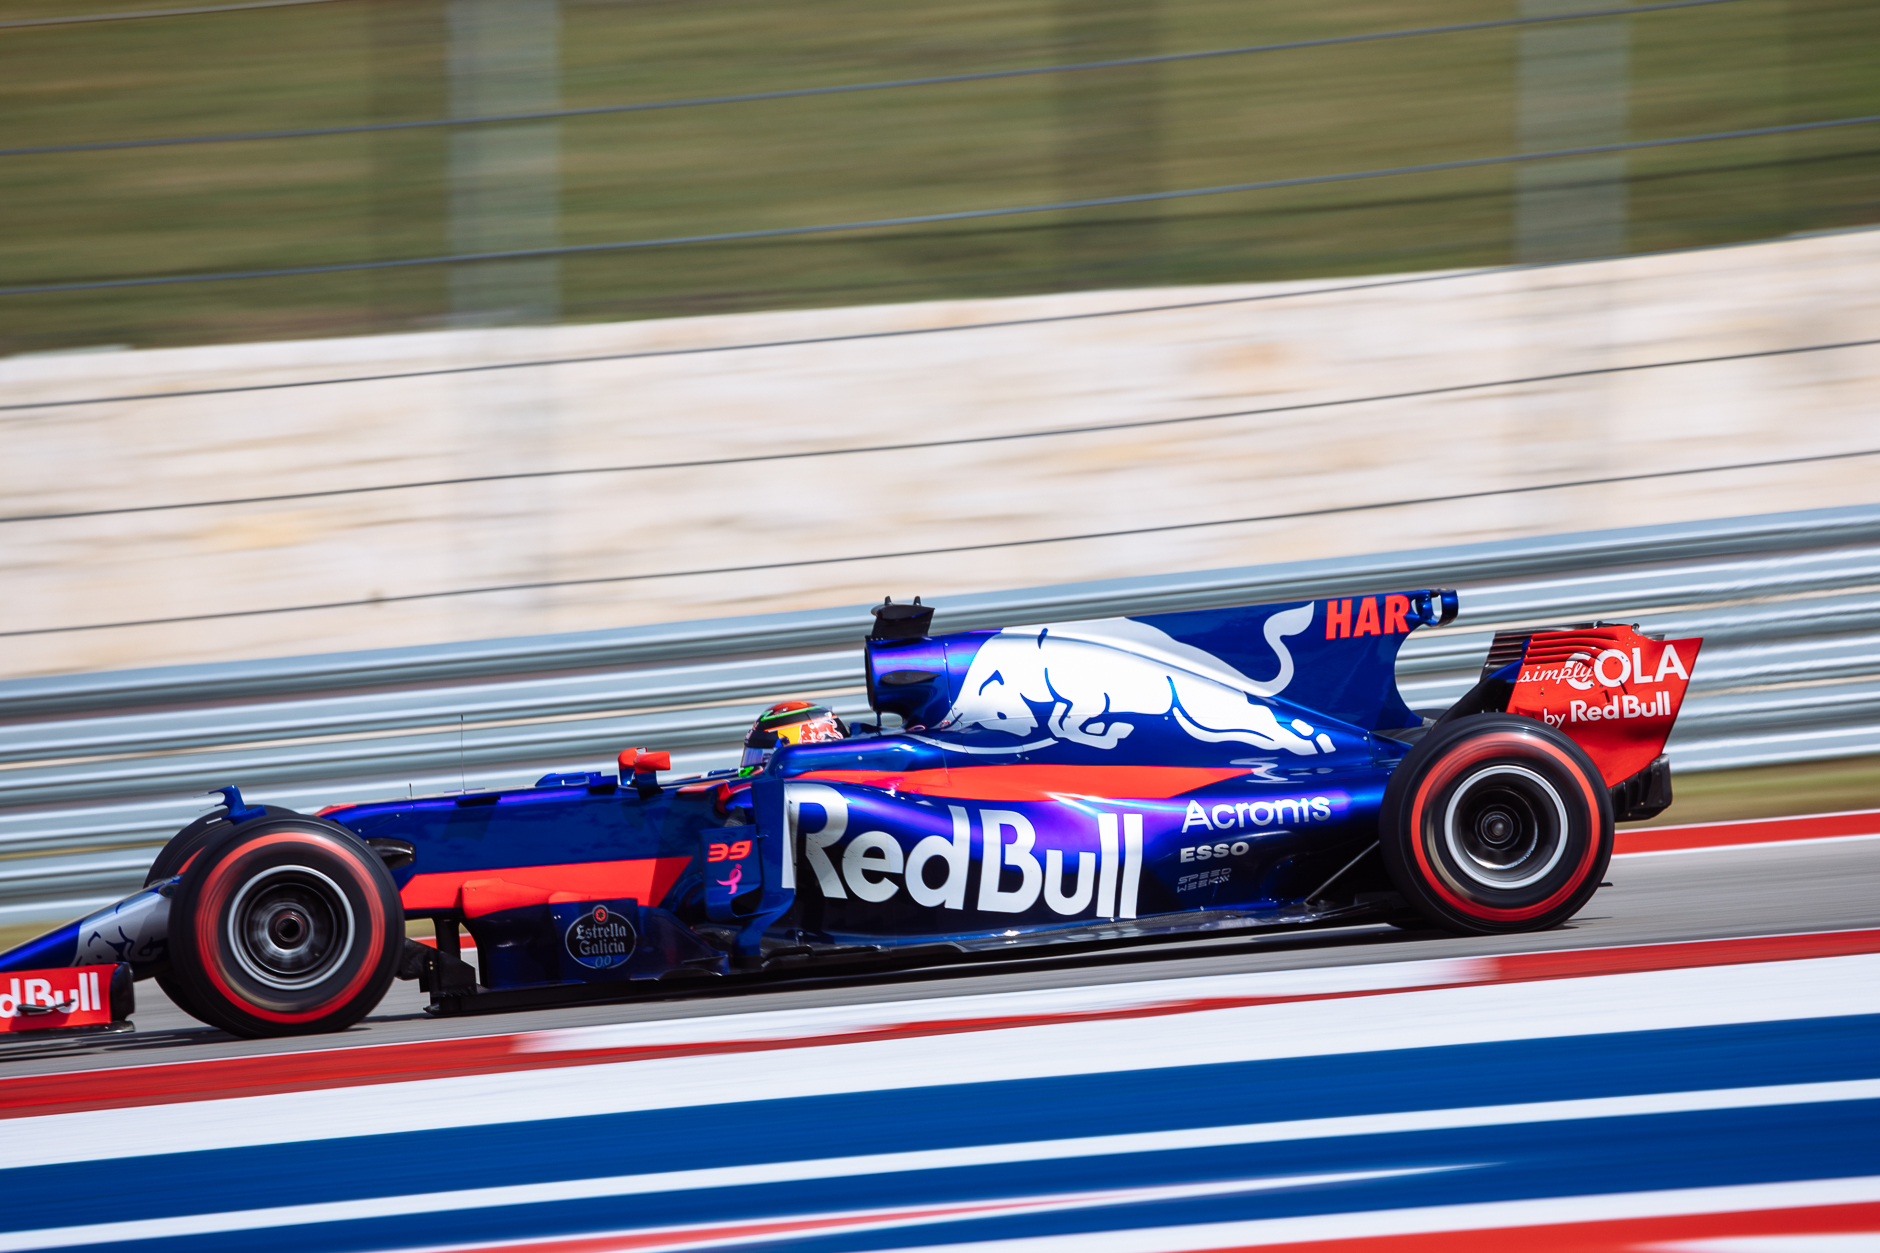 Scuderia Toro Rosso's Brendon Hartley—who only last month won the "6 Hours of COTA" race in Austin as part of the WEC series—in his first ever F1 race.